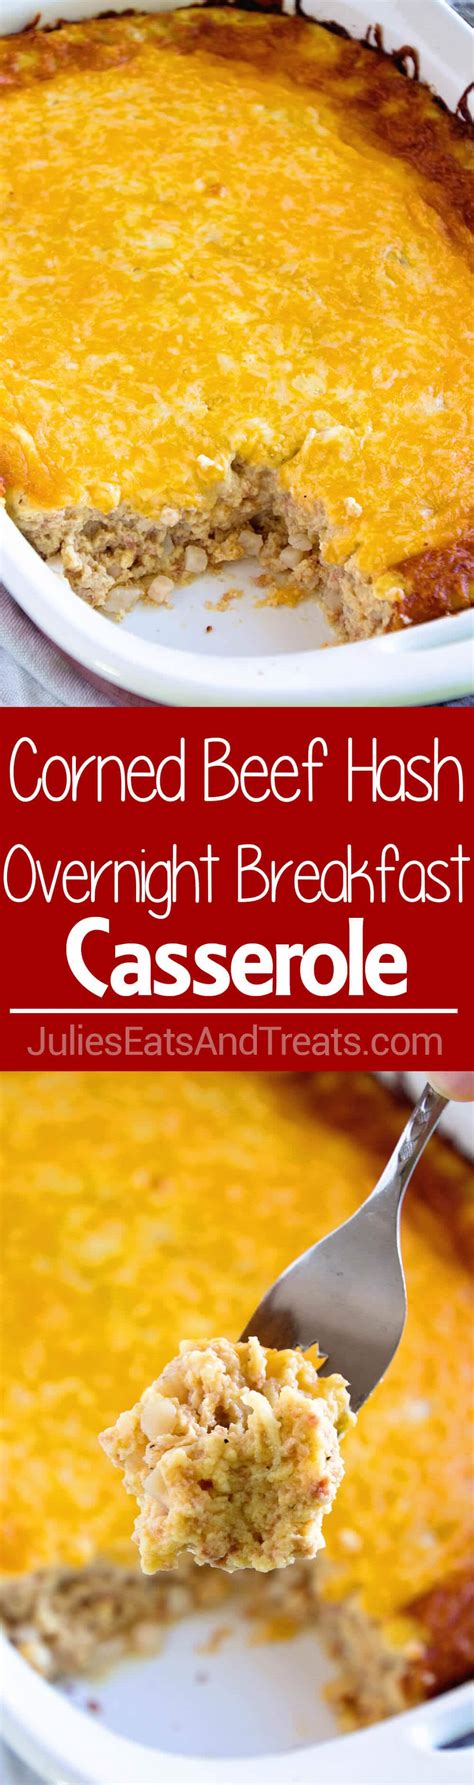 Corned beef and cabbage casserole with a hash brown crust. Corned Beef Hash Overnight Breakfast Casserole - Julie's ...